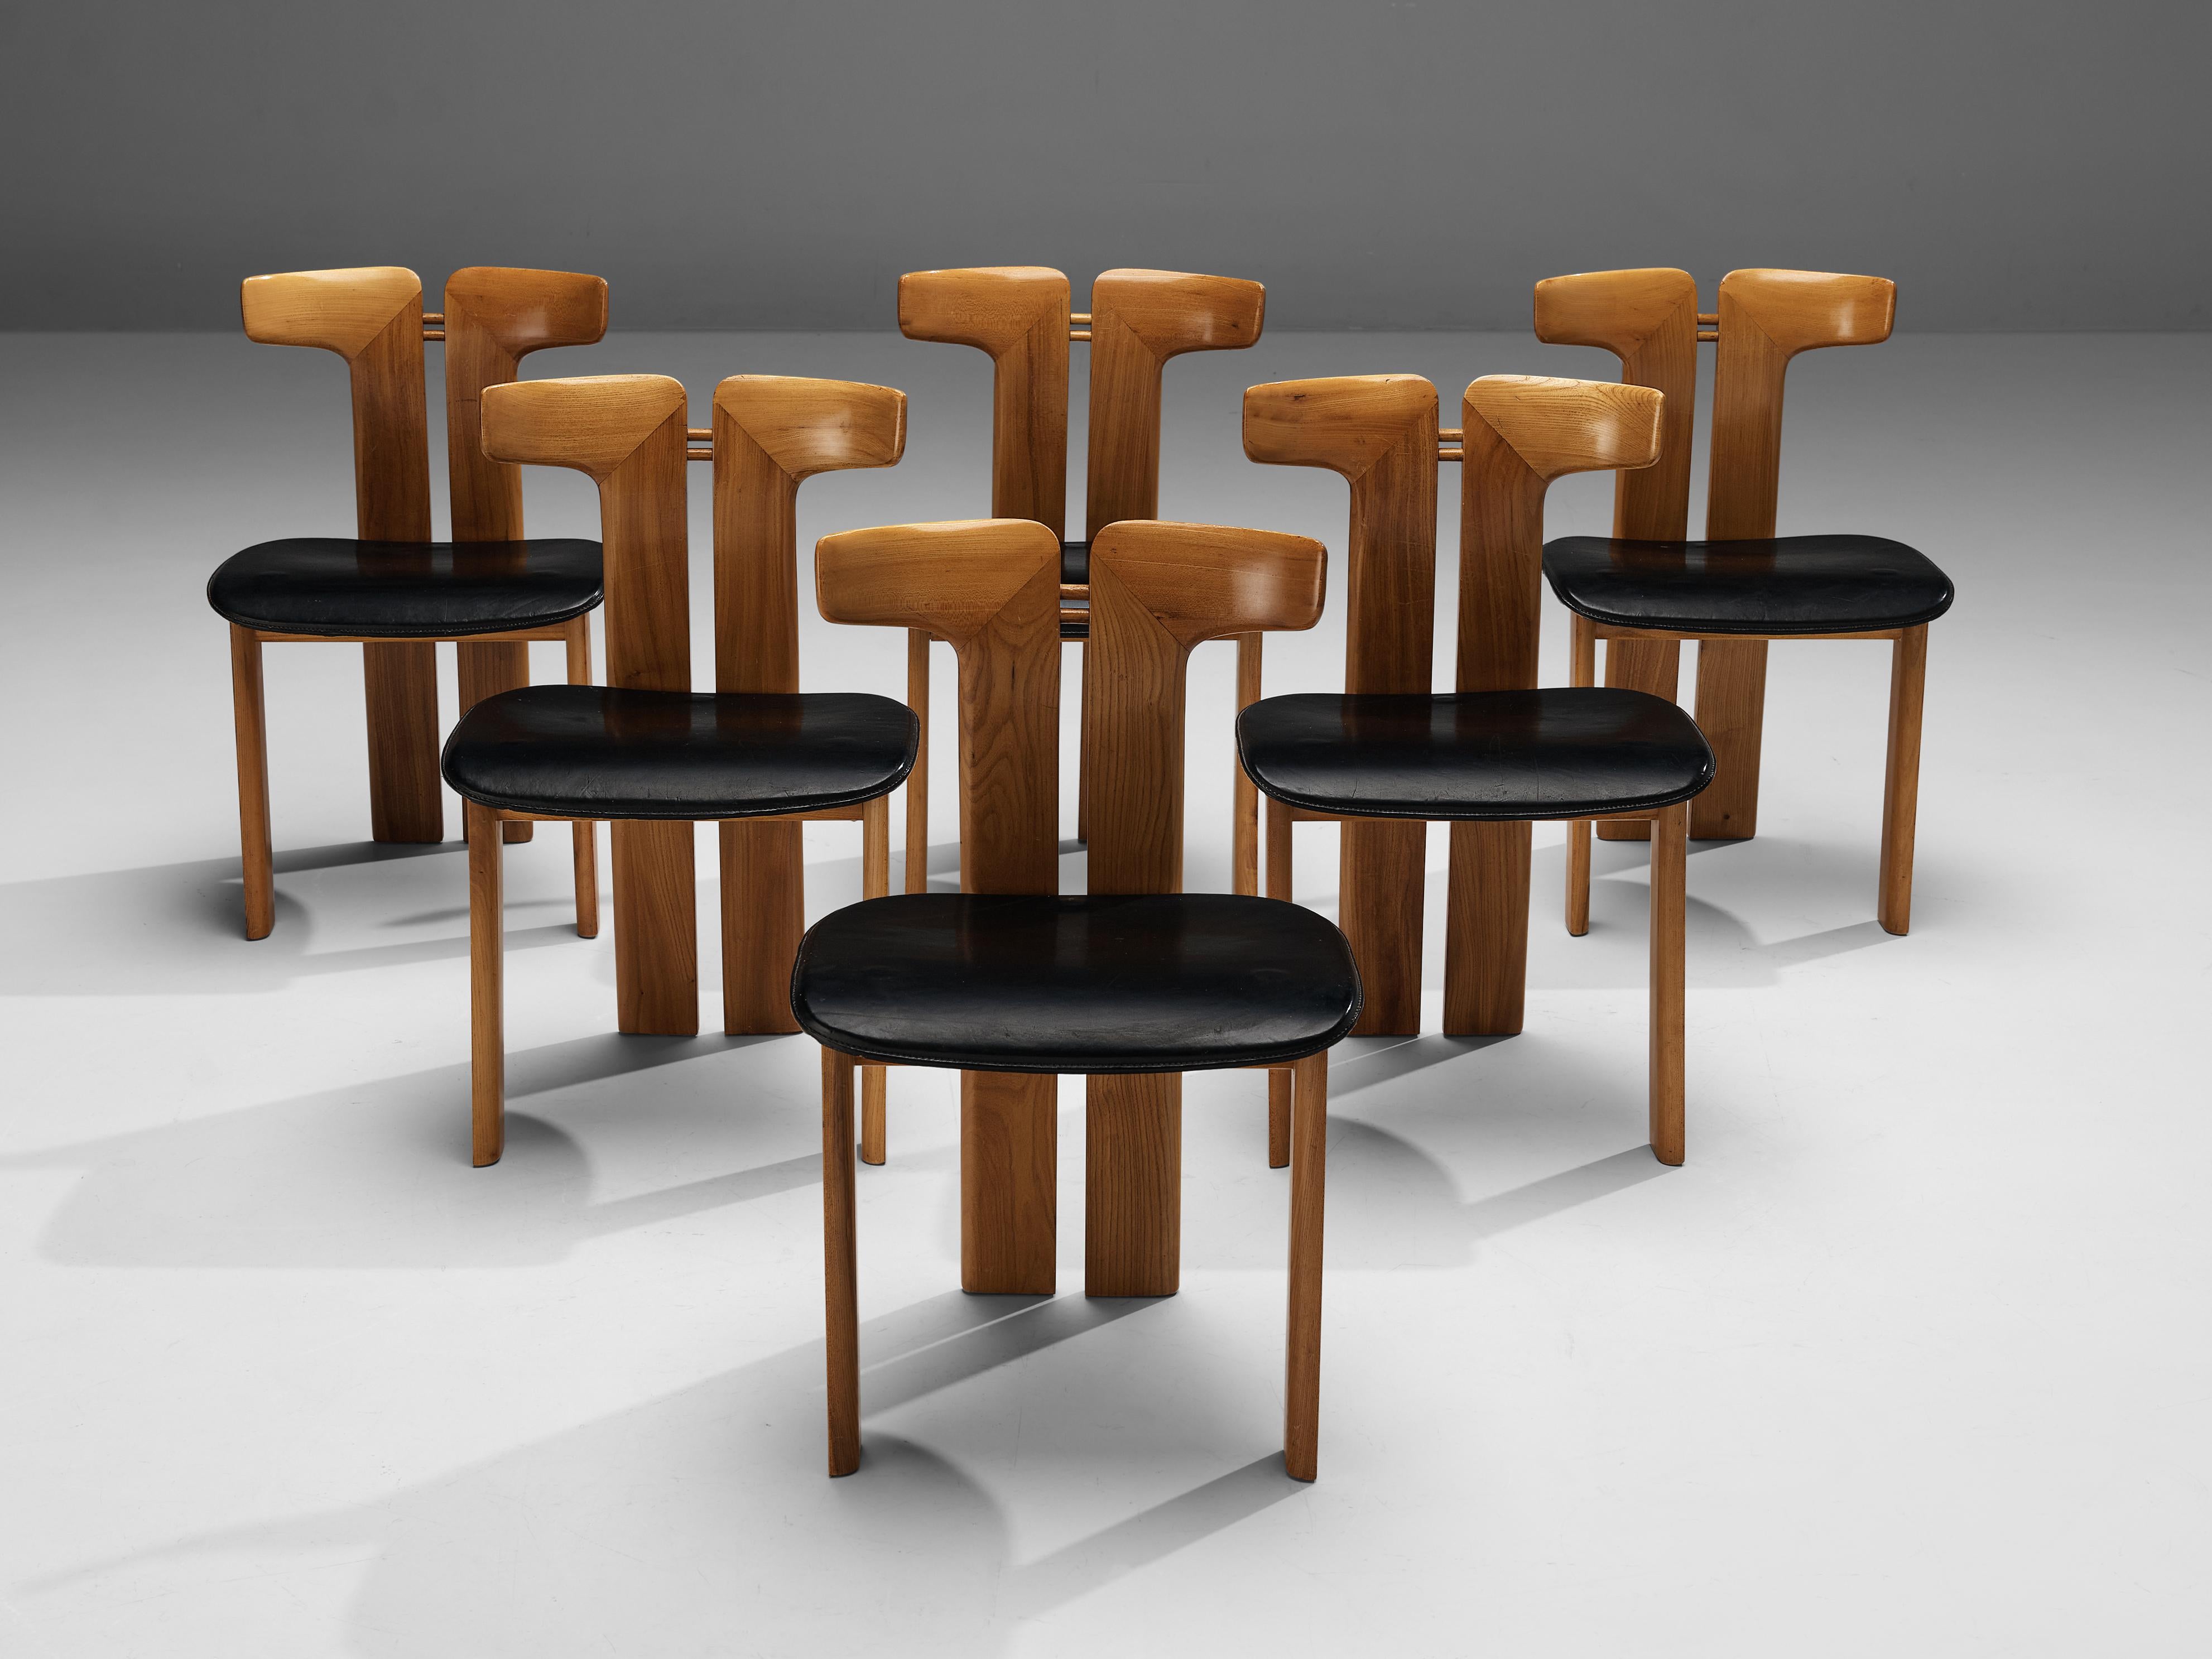 Pierre Cardin, dining chairs, walnut, black leather, Italy, 1980s 

This set of sculptural chairs is designed by Pierre Cardin. The curved back highlights the qualities of the wood and its shape in an unparalleled manner. These organic lines are